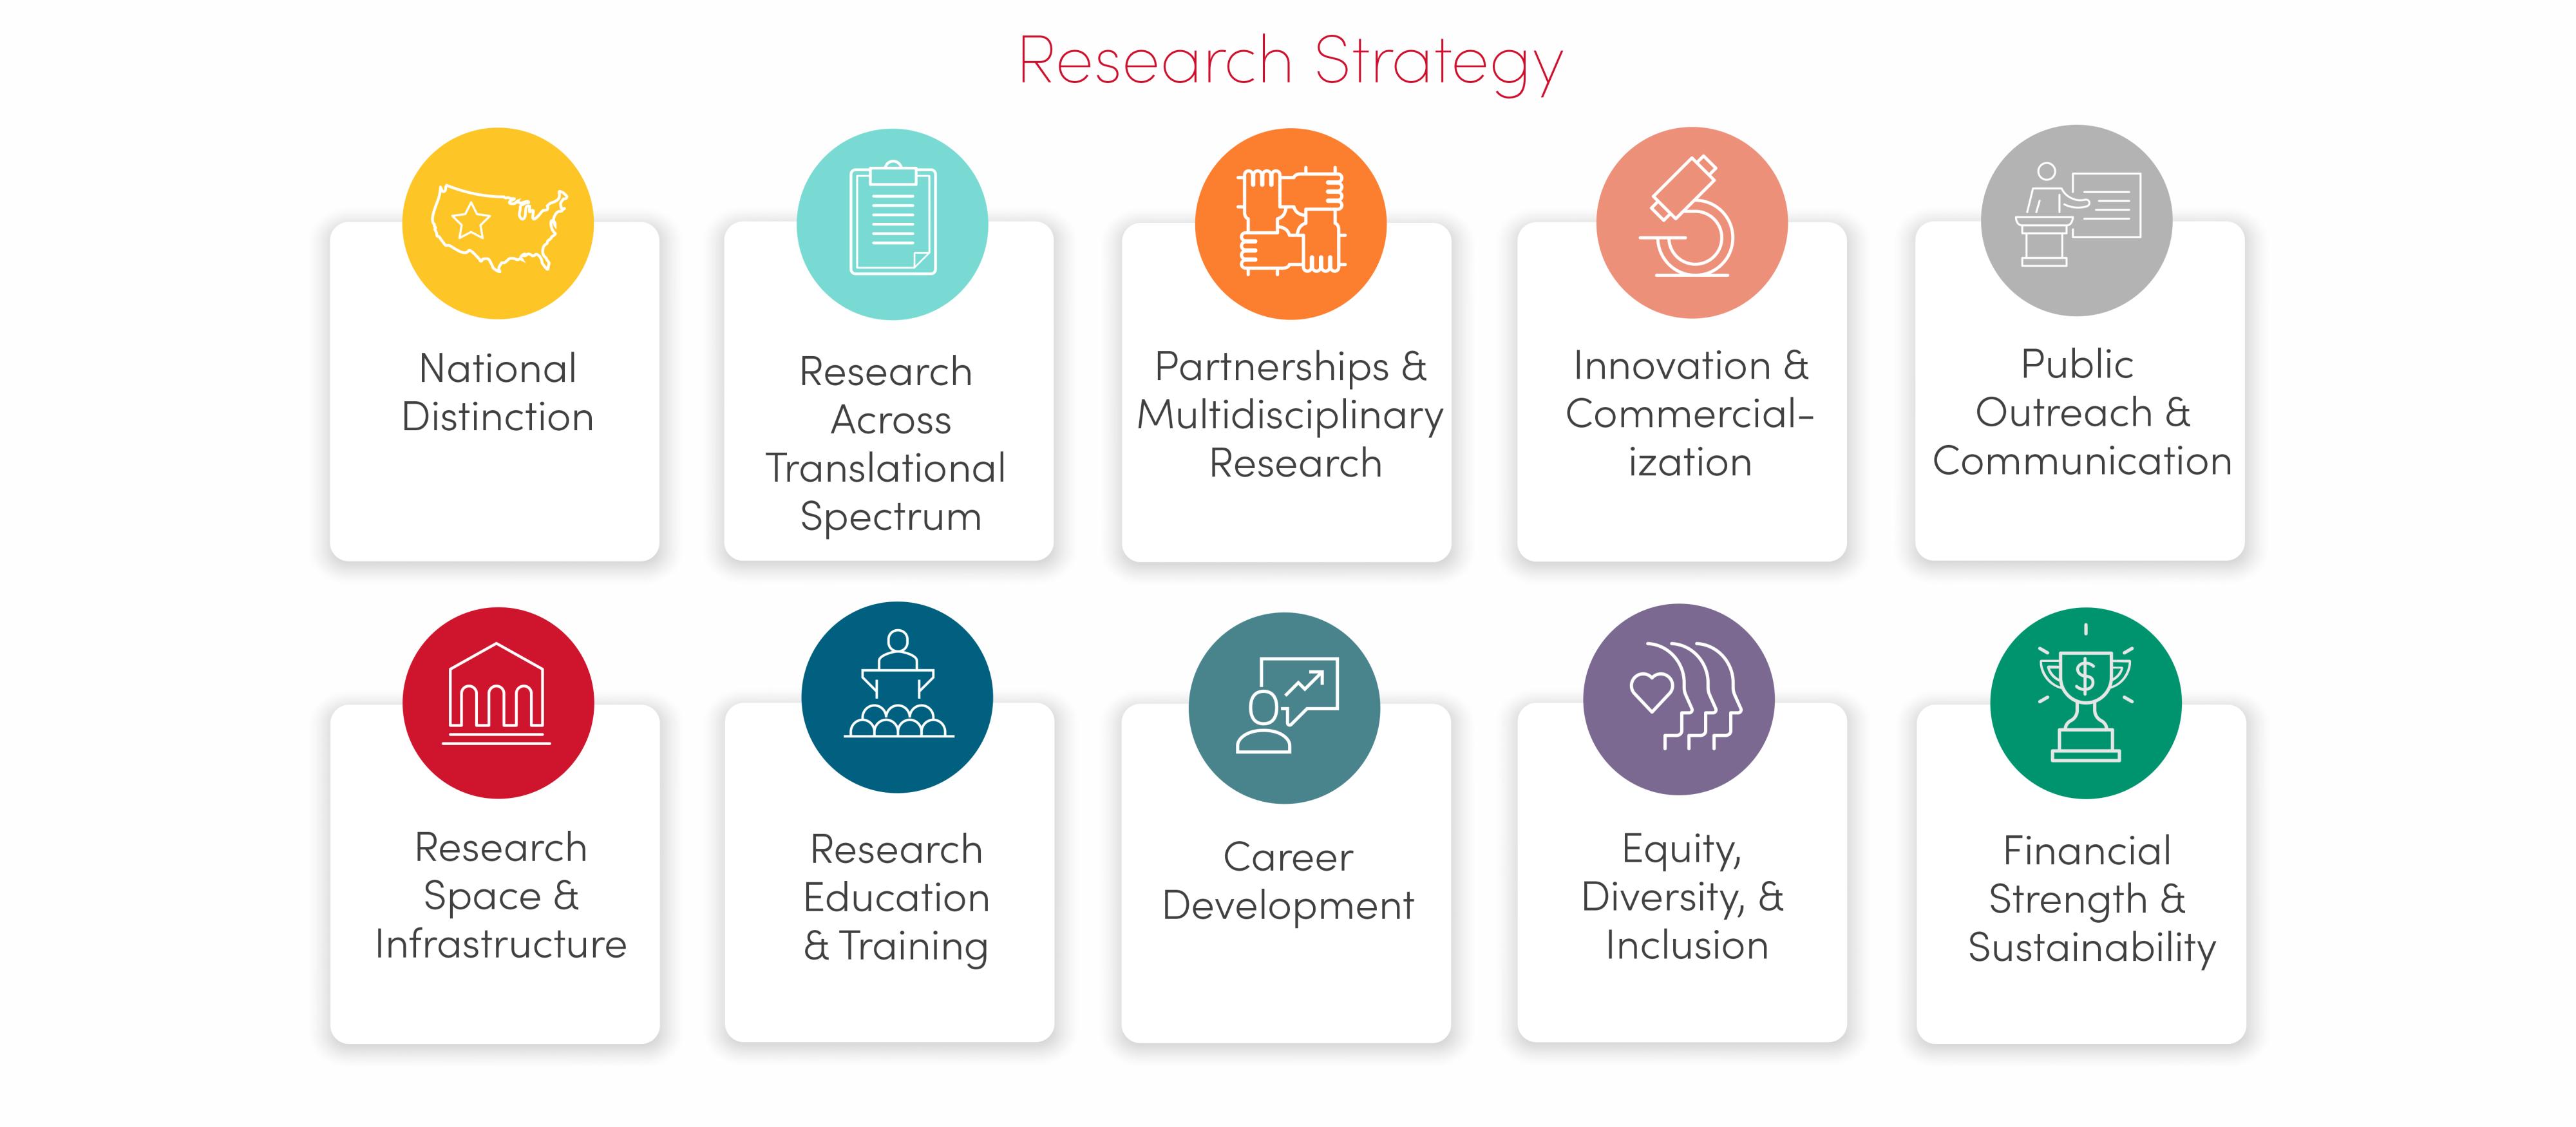 U of U Health Research Strategy icons showing the 10 pillars